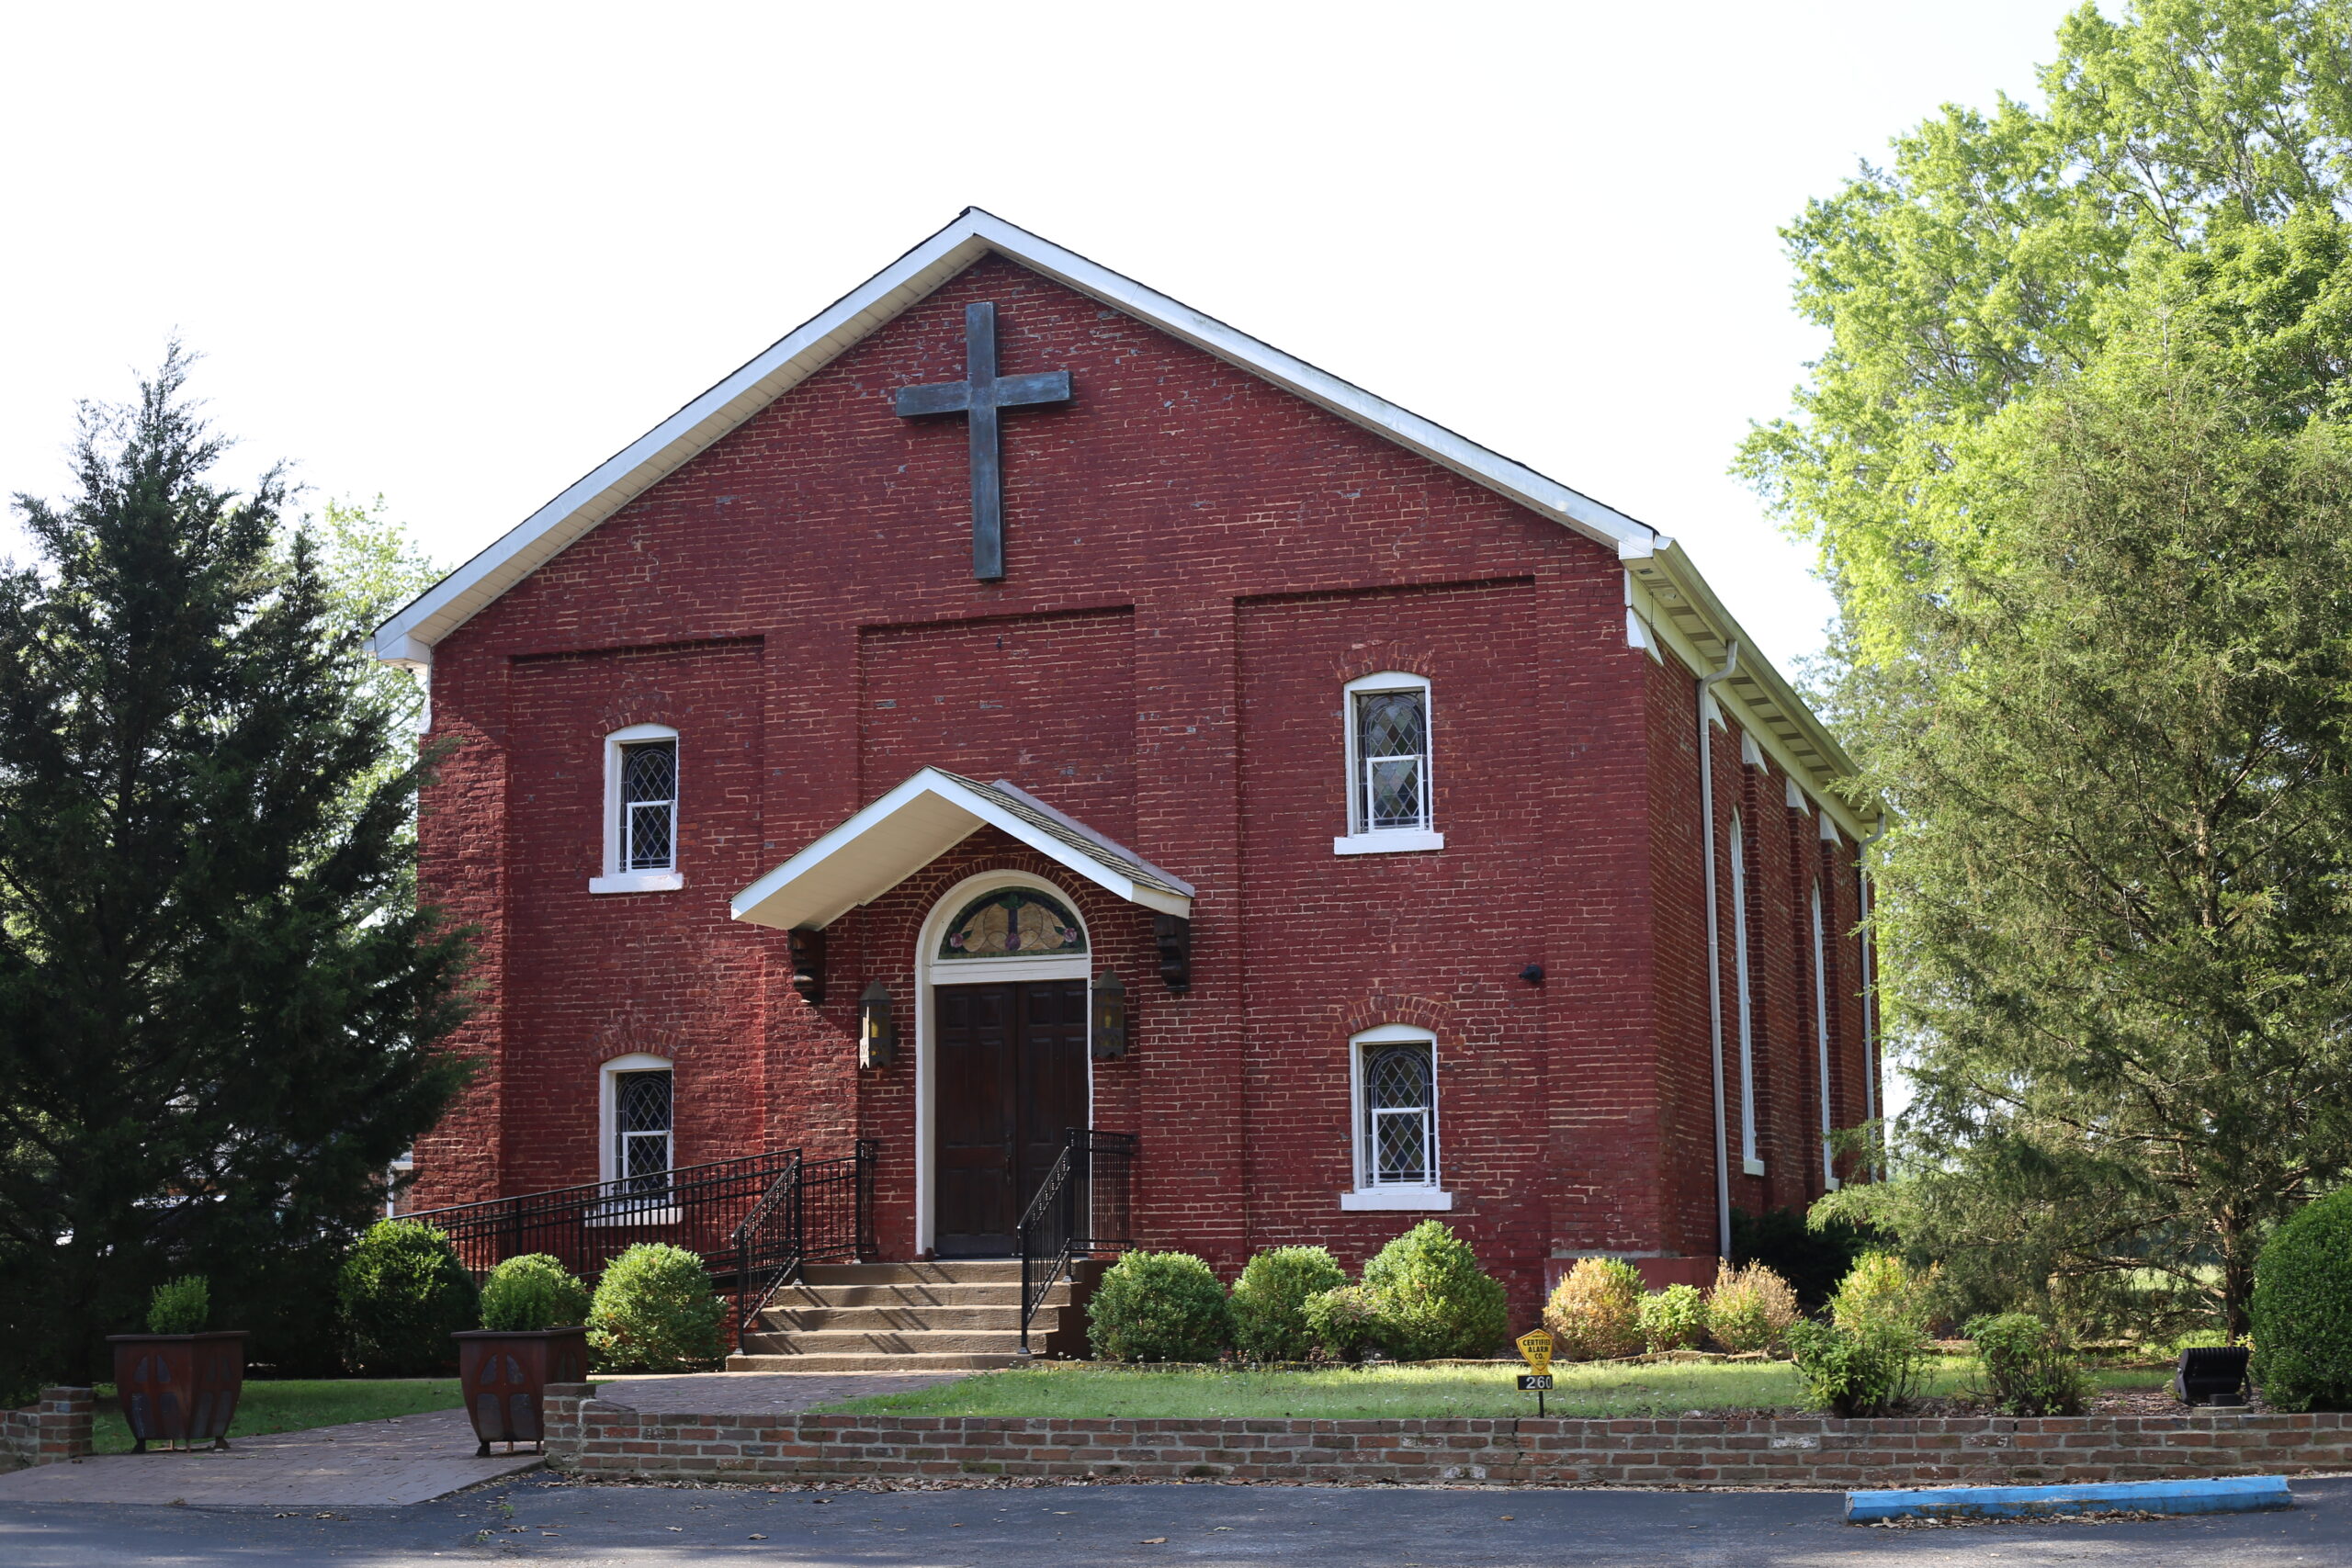 Front of Old Brick Church building